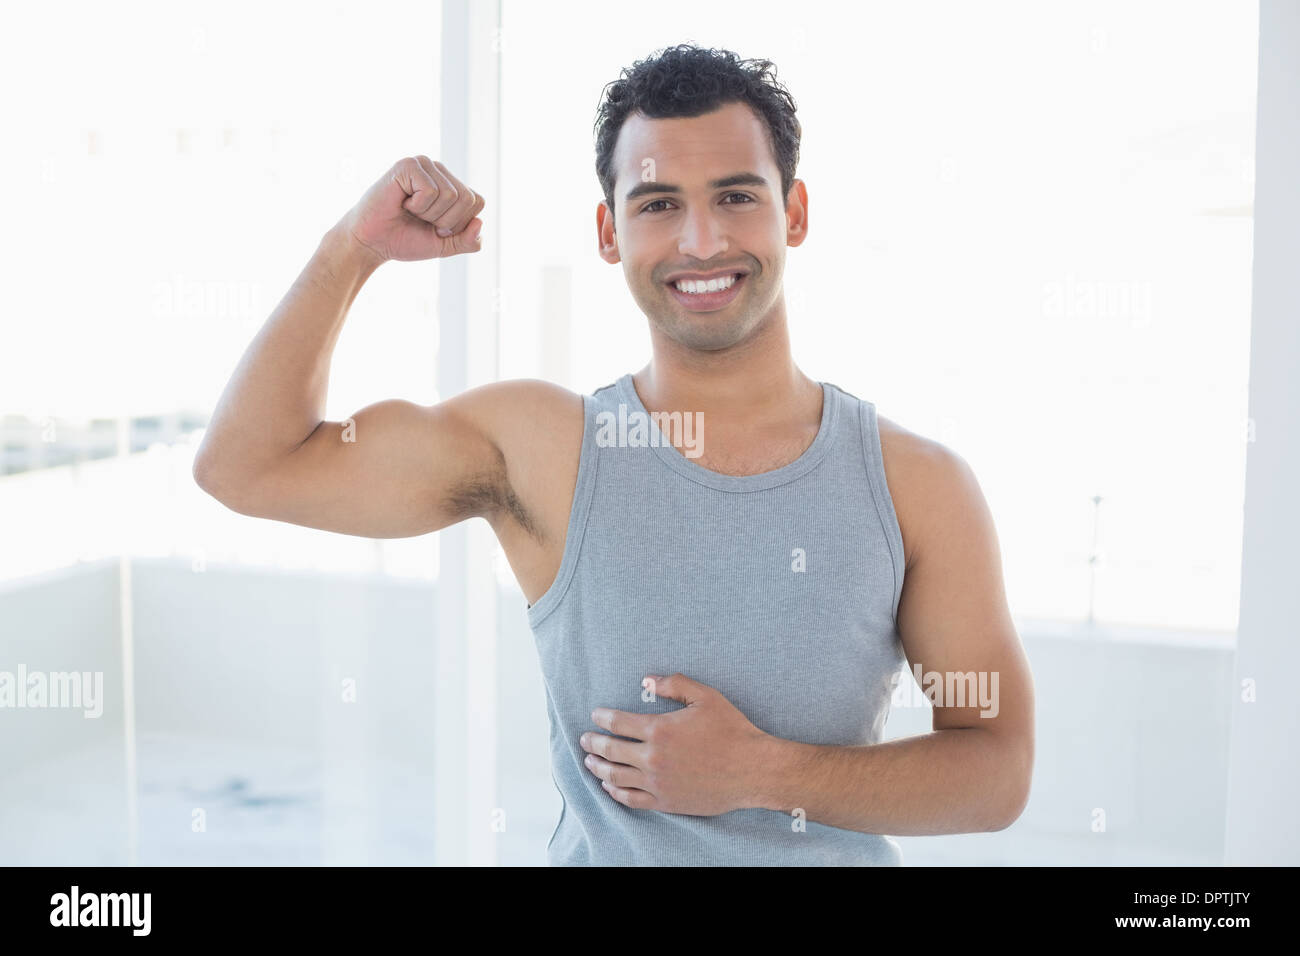 Portrait of a fit man flexing muscles in fitness studio Stock Photo